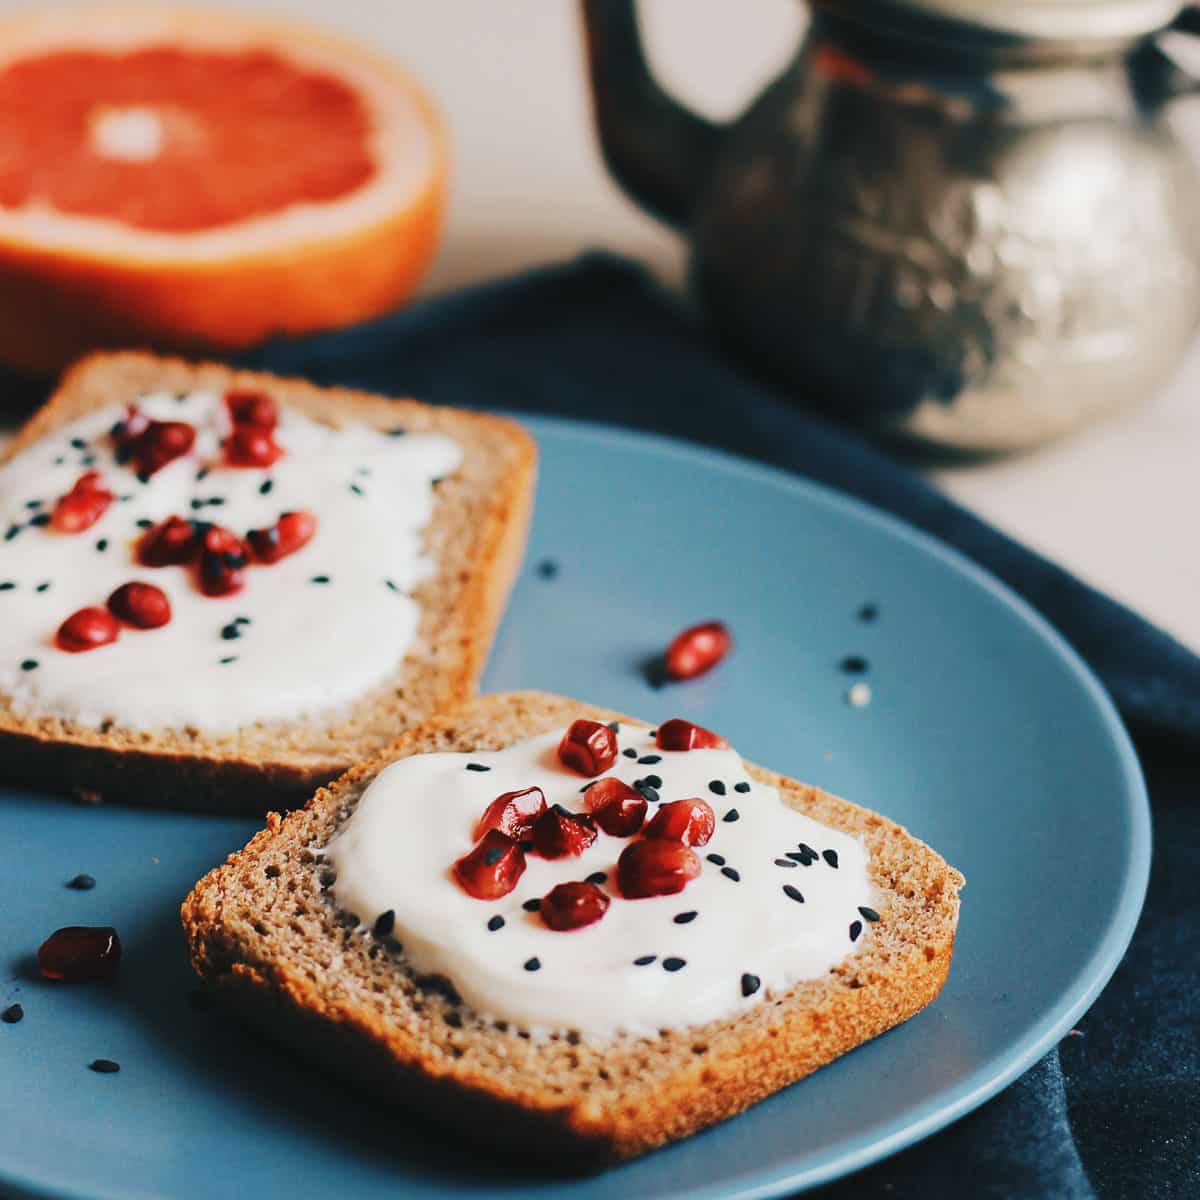 nigella seeds sprinkled on toast with cream cheese spread and pomegranate seeds